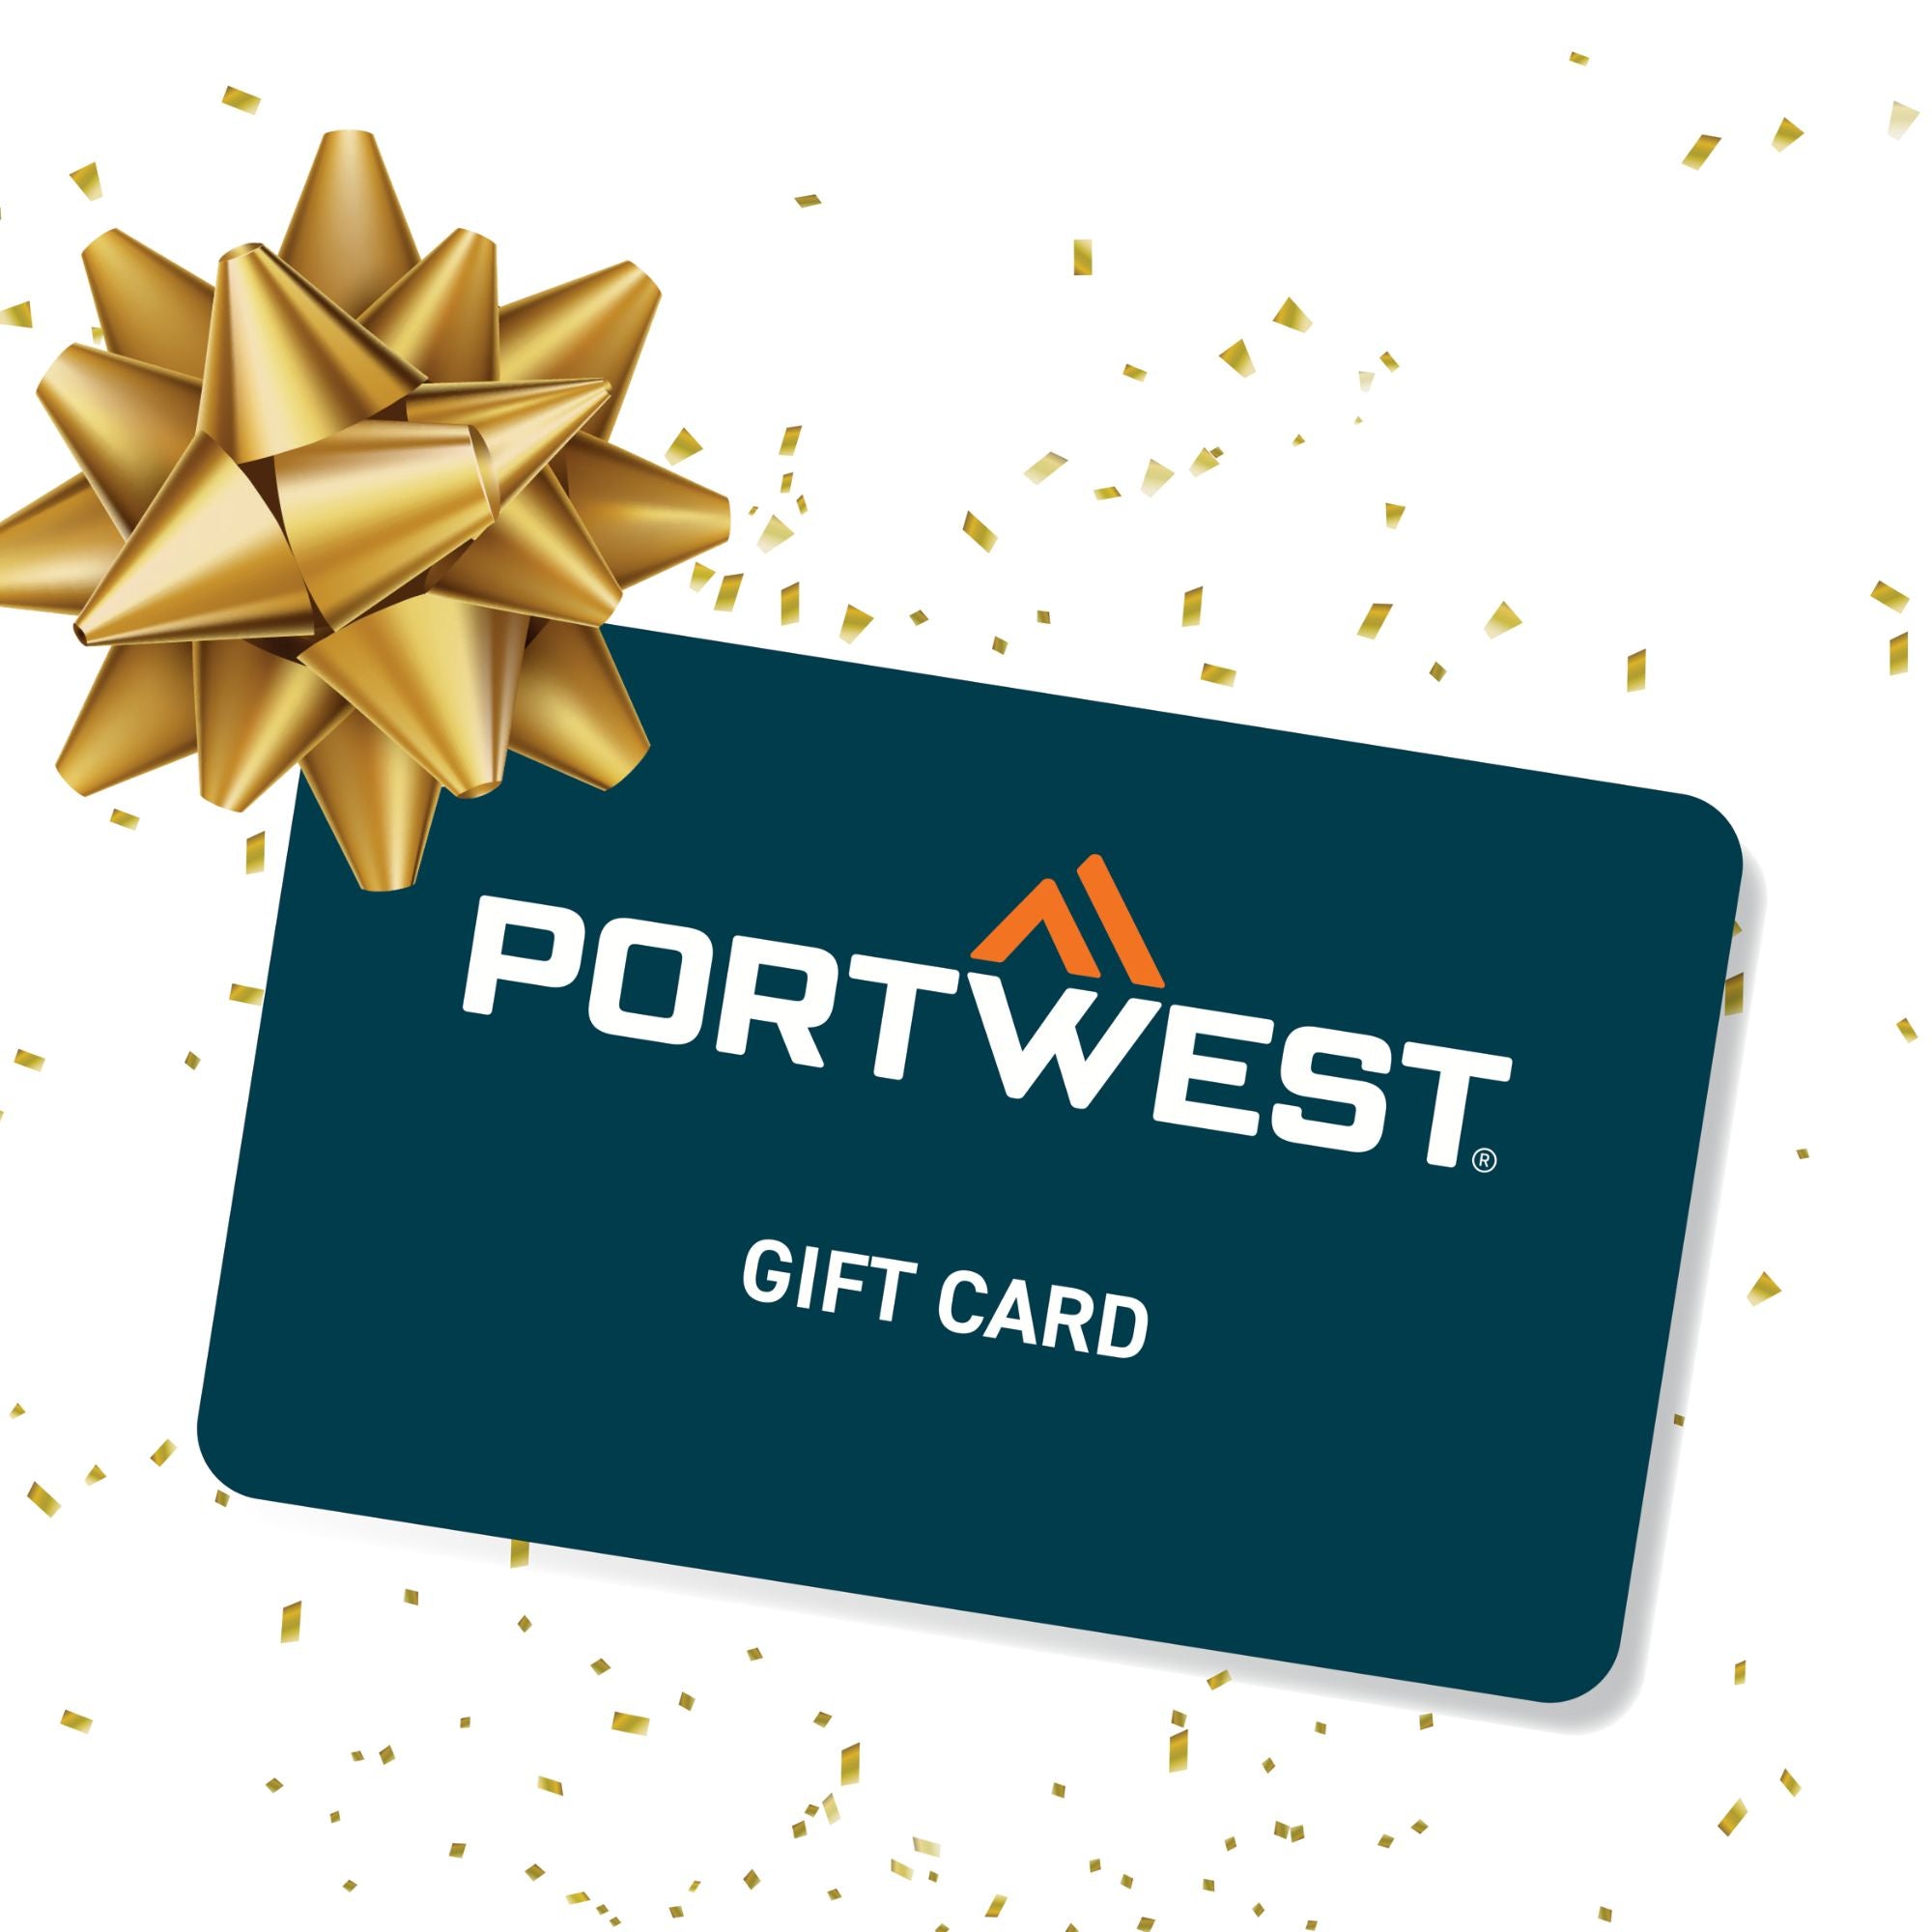 Portwest Ireland Gift Card - For Online Use